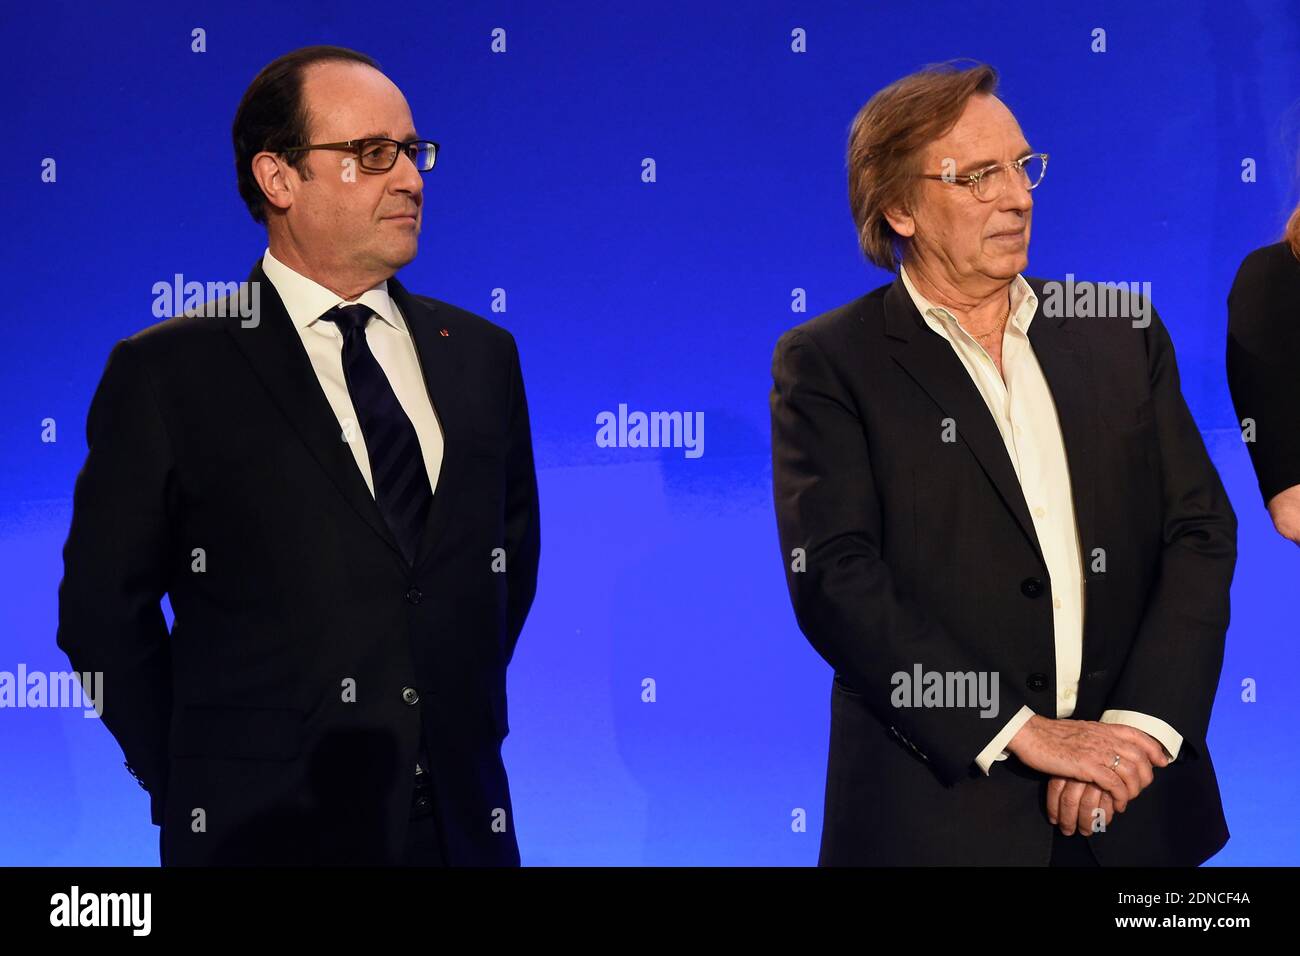 French President Francois Hollande and director Alexander Arcady during the 30th annual Dinner of the Representative Council of the Jews of France (CRIF) held at the Pullman Montparnasse Hotel in Paris, France on February 23, 2015. Photo Pool by Erez Lichtfeld/ABACAPRESS.COM Stock Photo